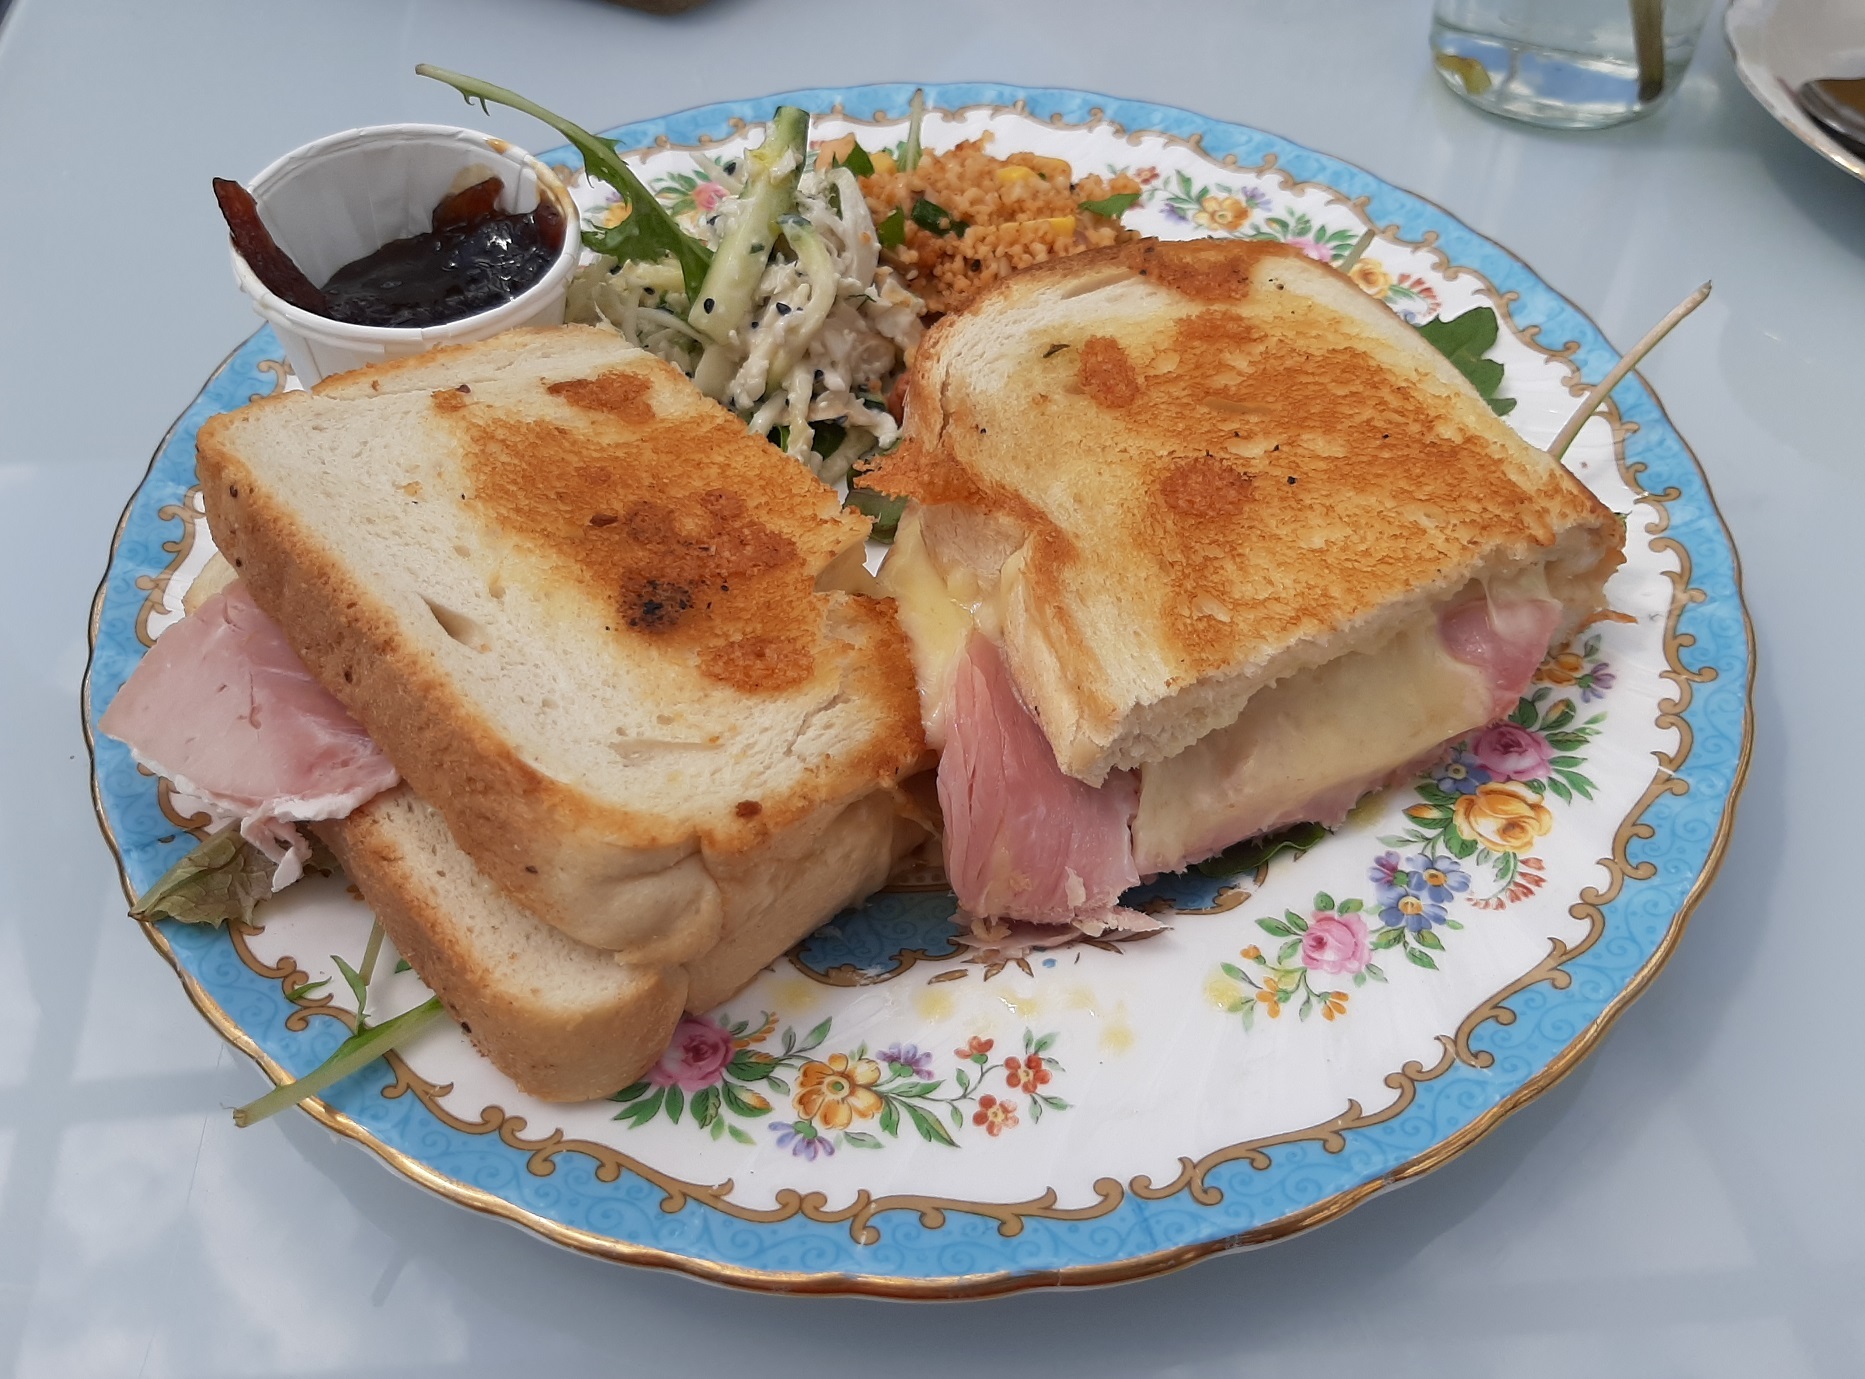 The Yorkshire ham and mature cheddar hot sandwich plate - a proper doorstep of bread